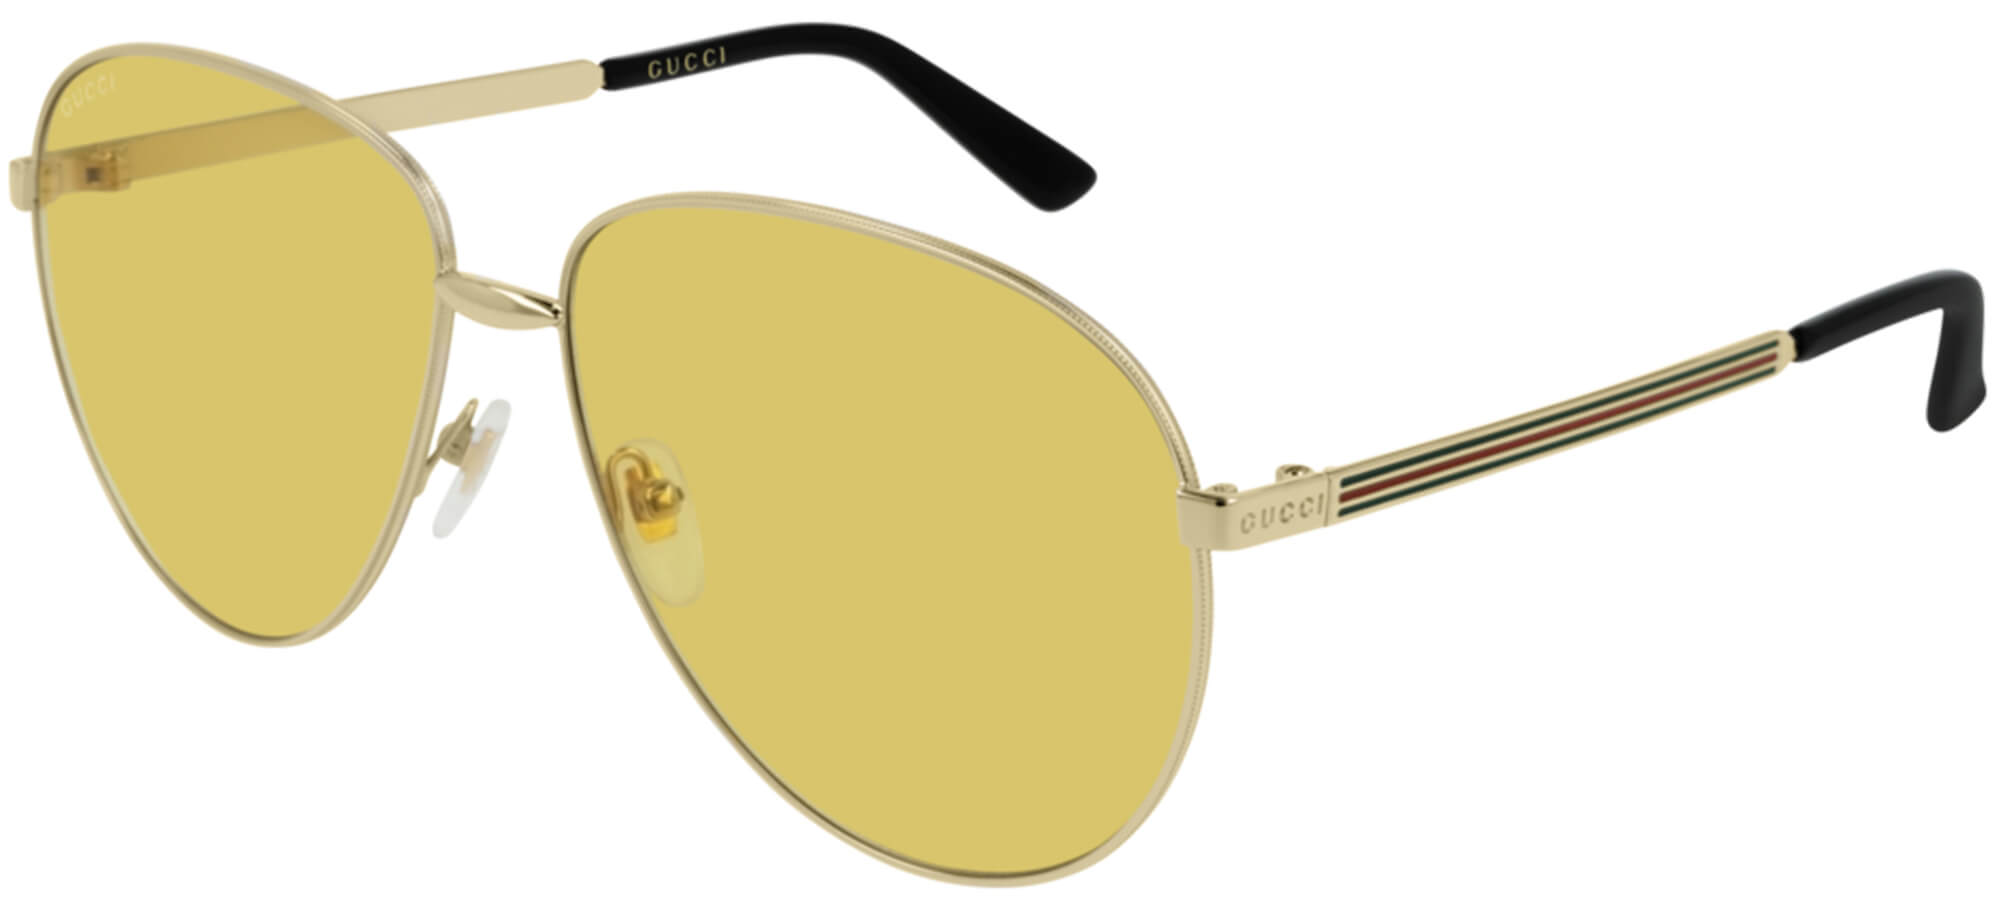 GucciGG0138SPale Gold/yellow (008 W)